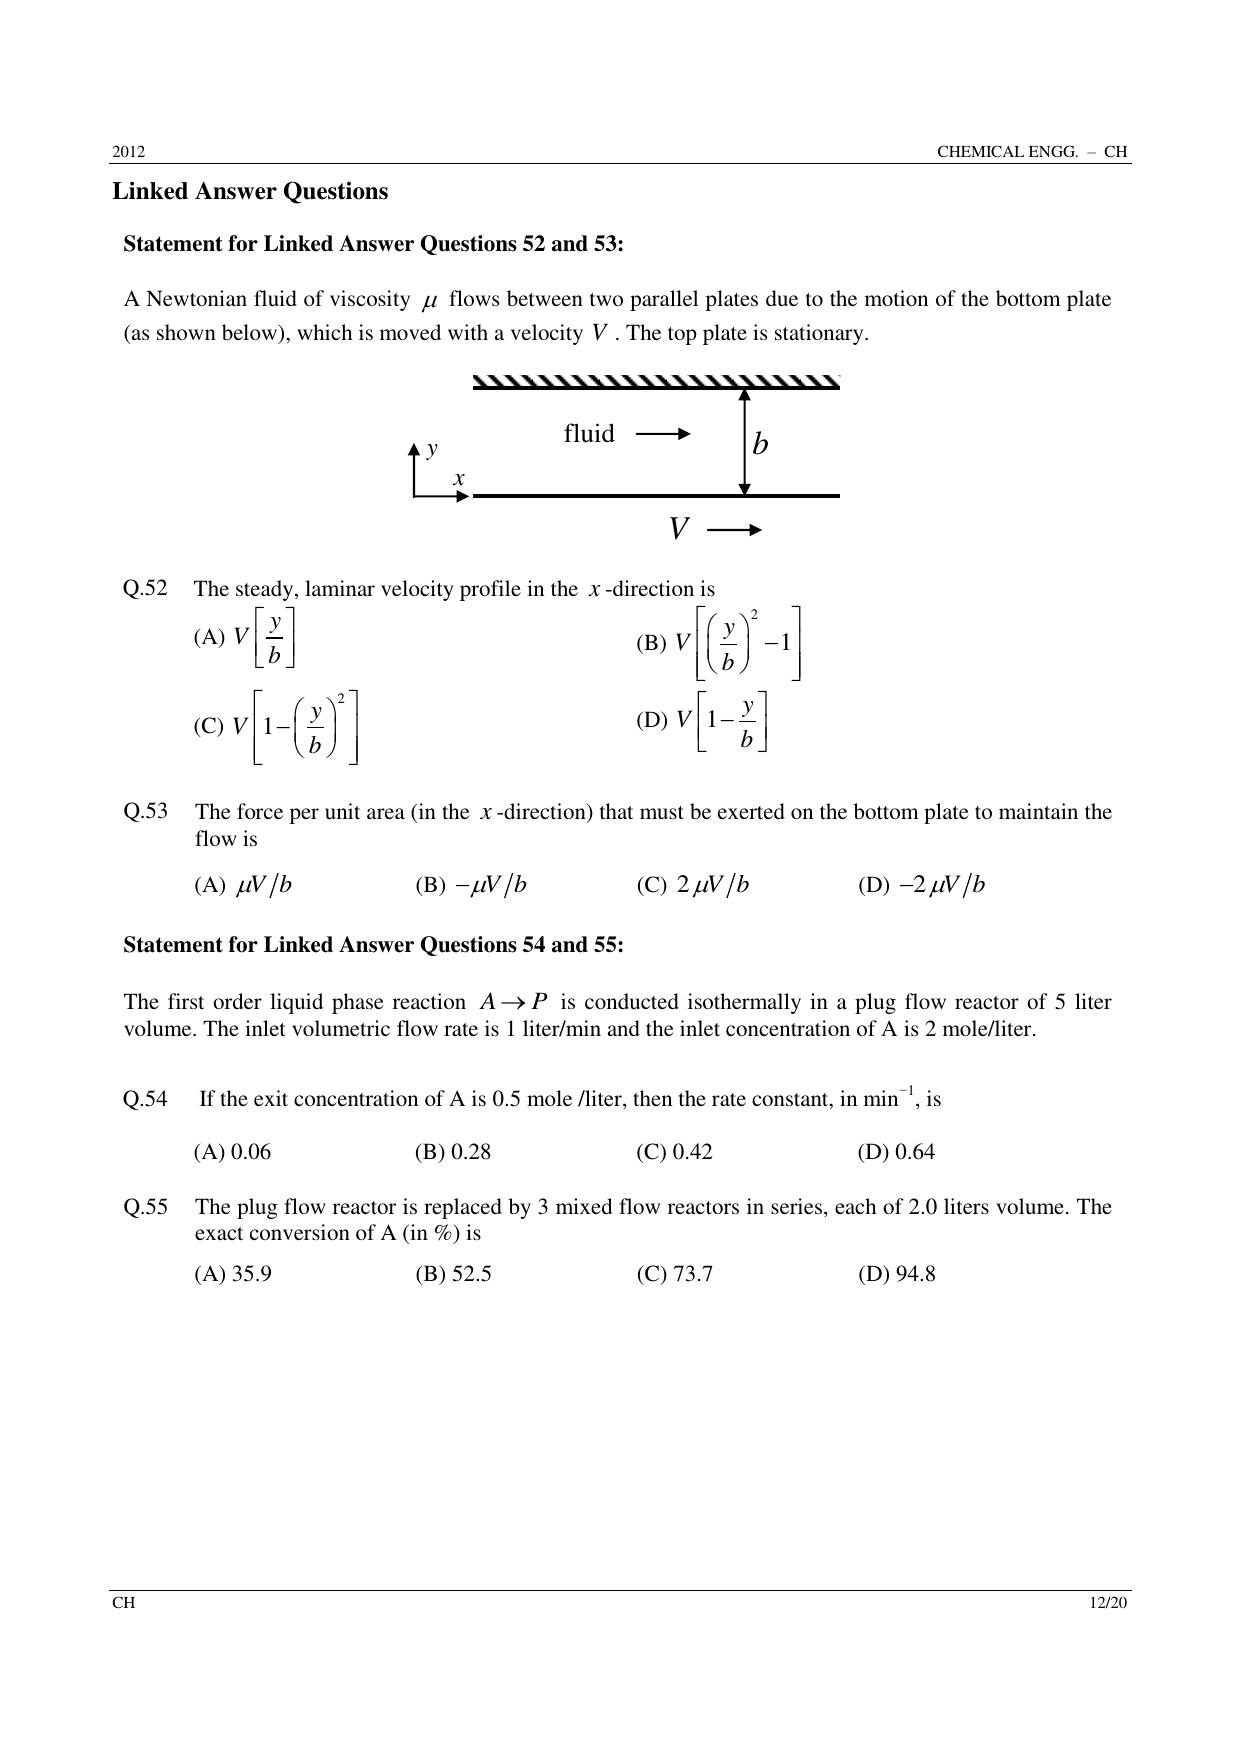 GATE 2012 Chemical Engineering (CH) Question Paper with Answer Key - Page 12